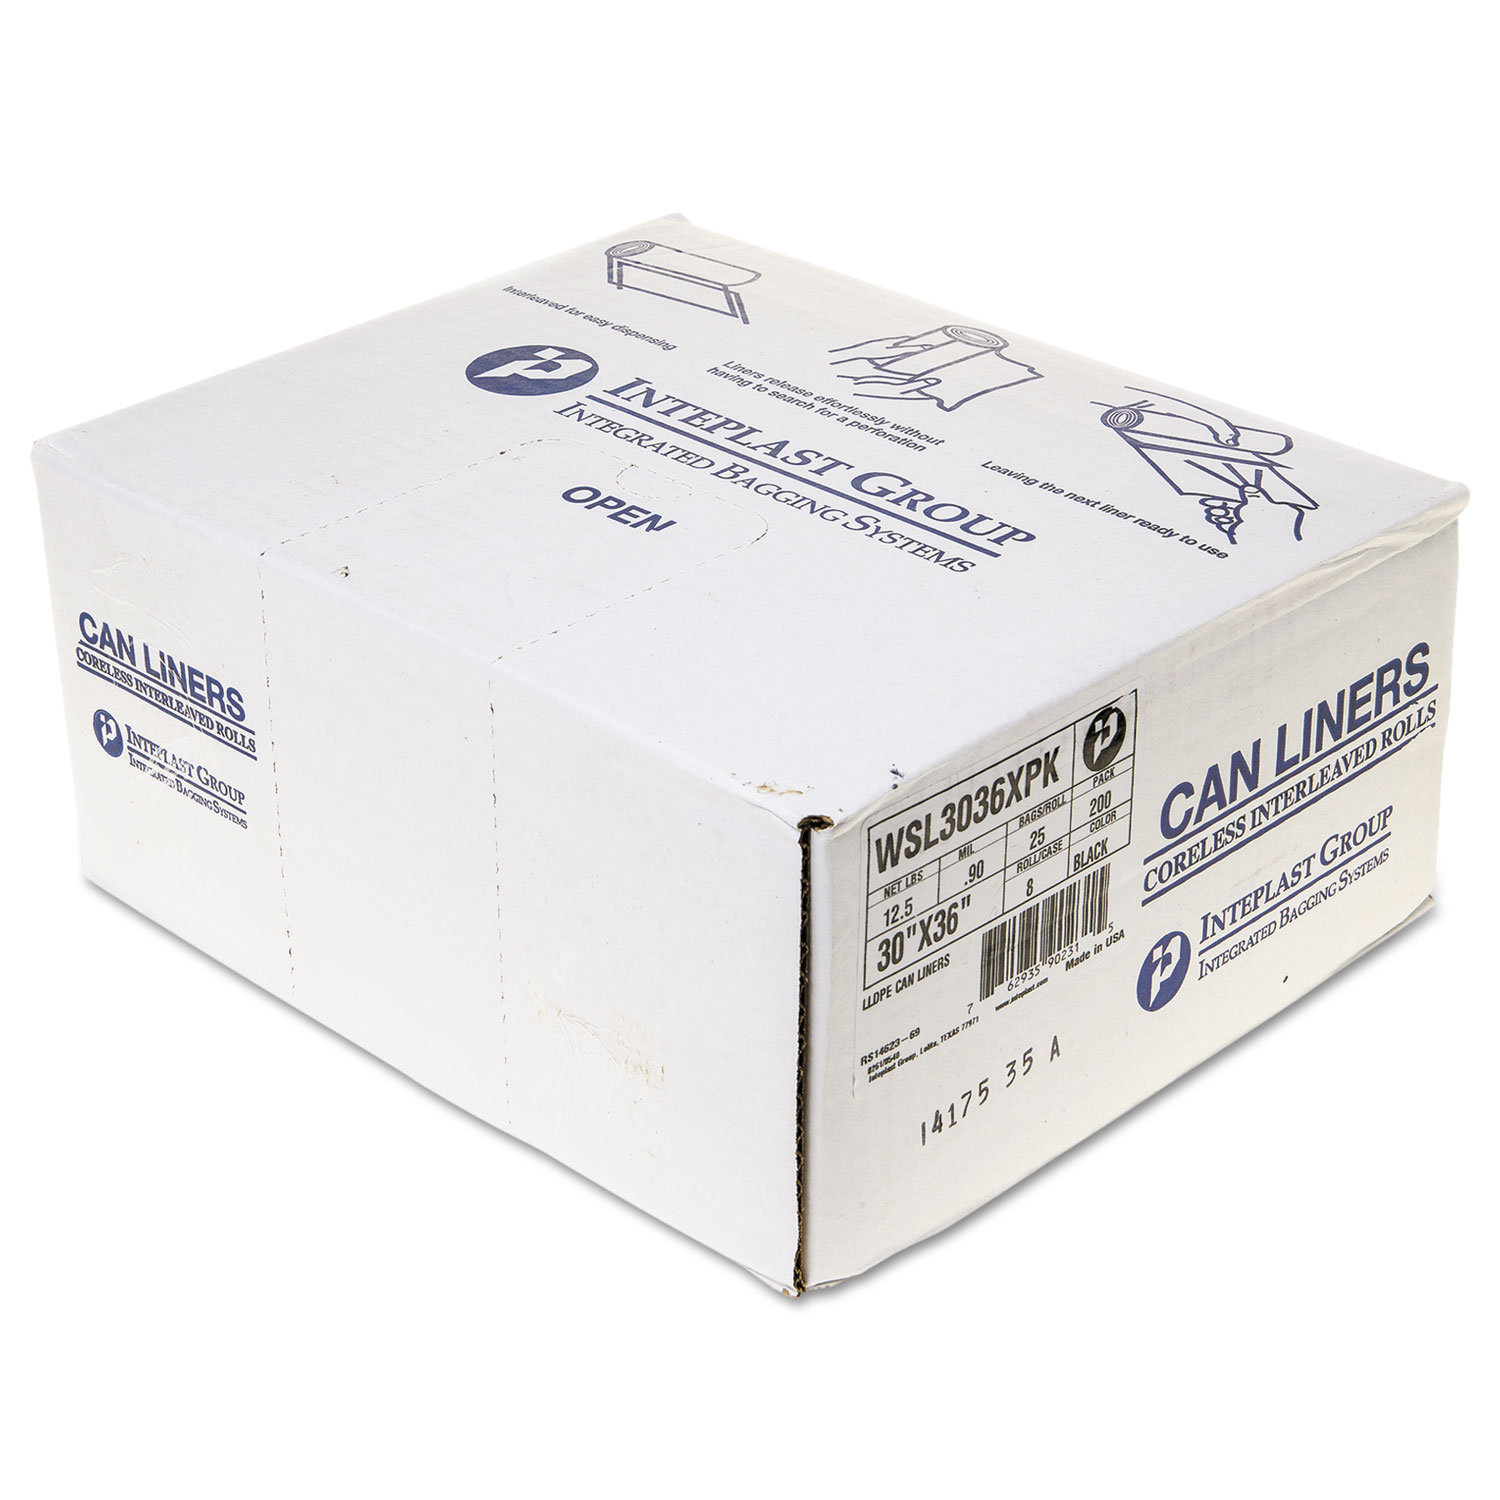  Inteplast Group WSL3036XPK Low-Density Commercial Can Liners, 30 gal, 0.9 mil, 30 x 36, Black, 200/Carton (IBSSL3036XPK) 